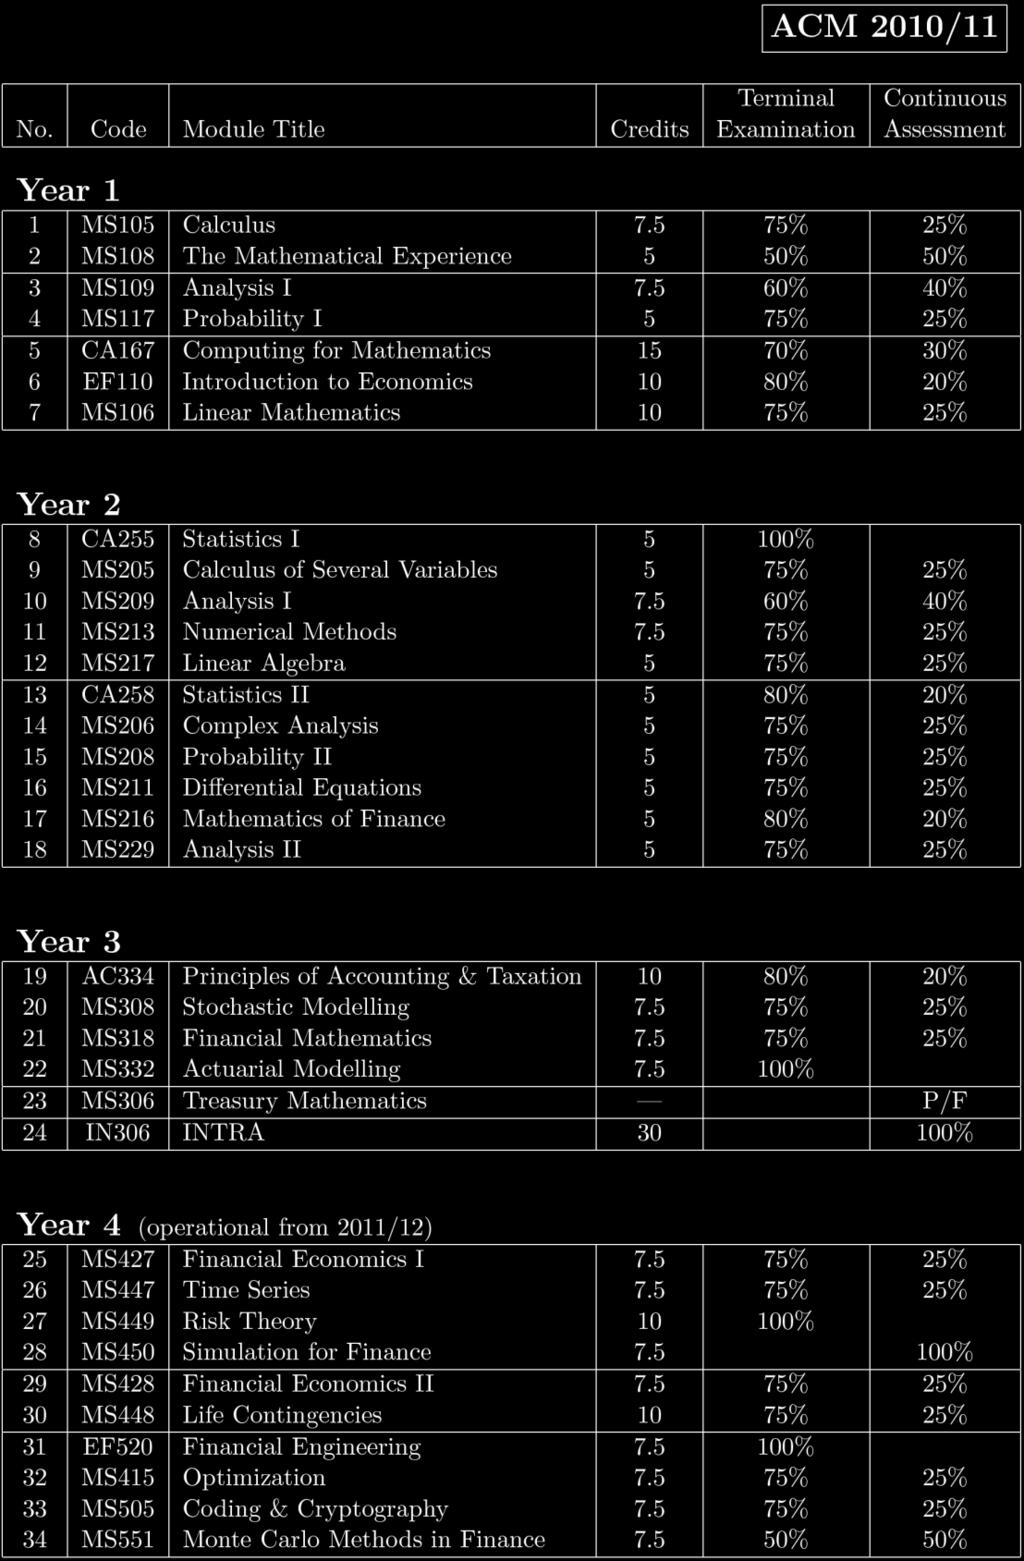 Table 4: 2010/11 Modules